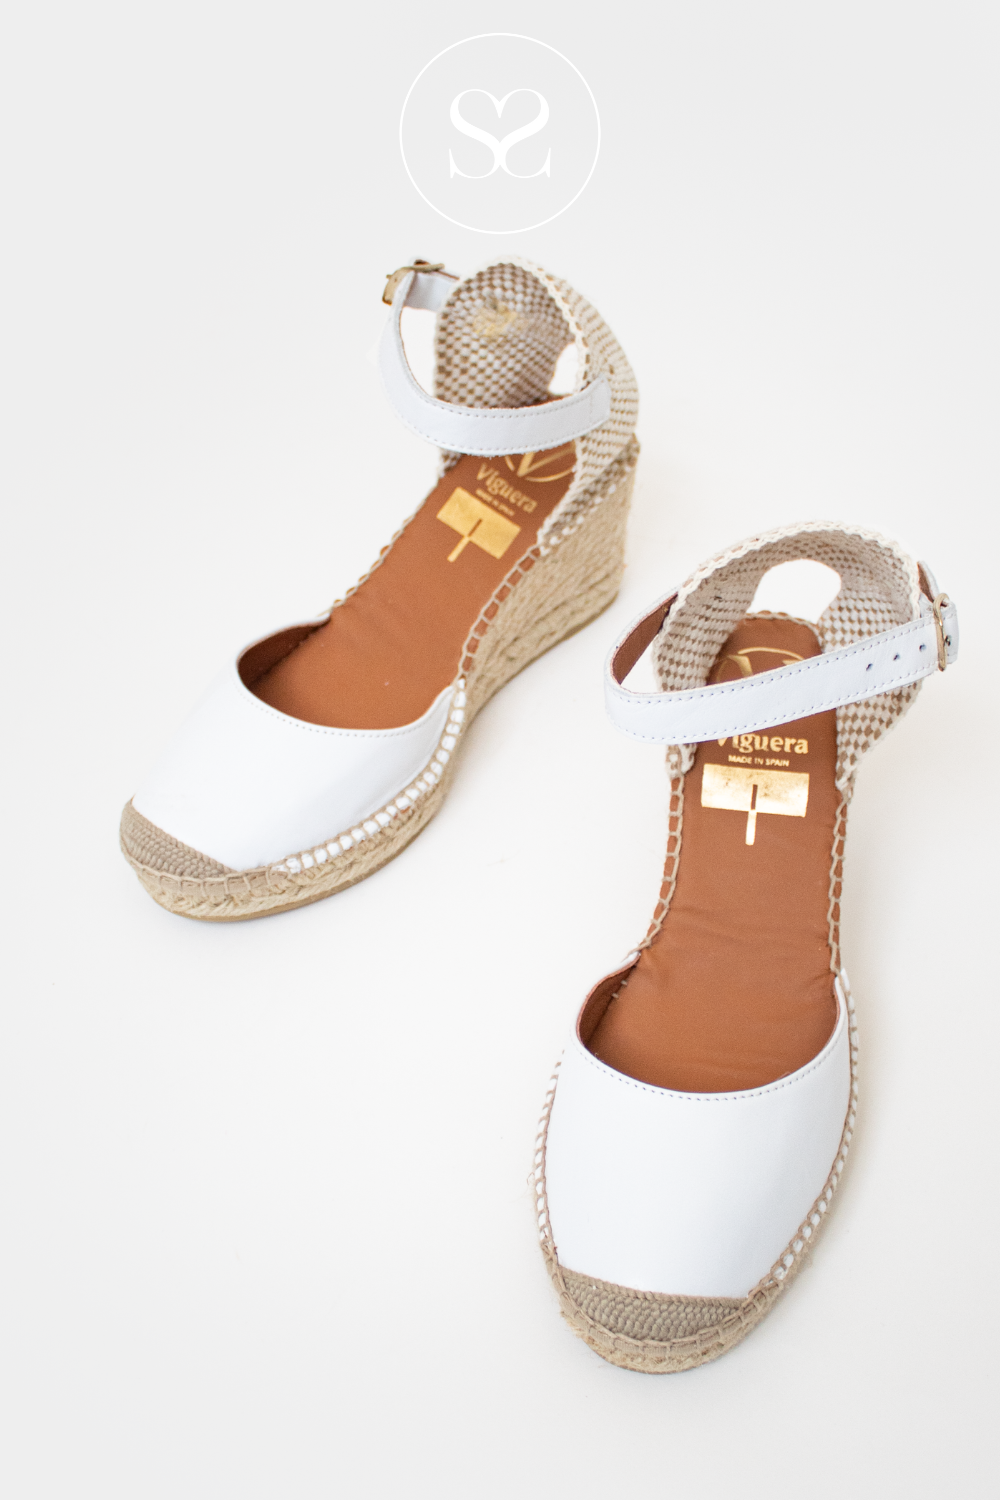 VIGUERA 1743 WHITE LEATHER ESPADRILLE LOW WEDGE 